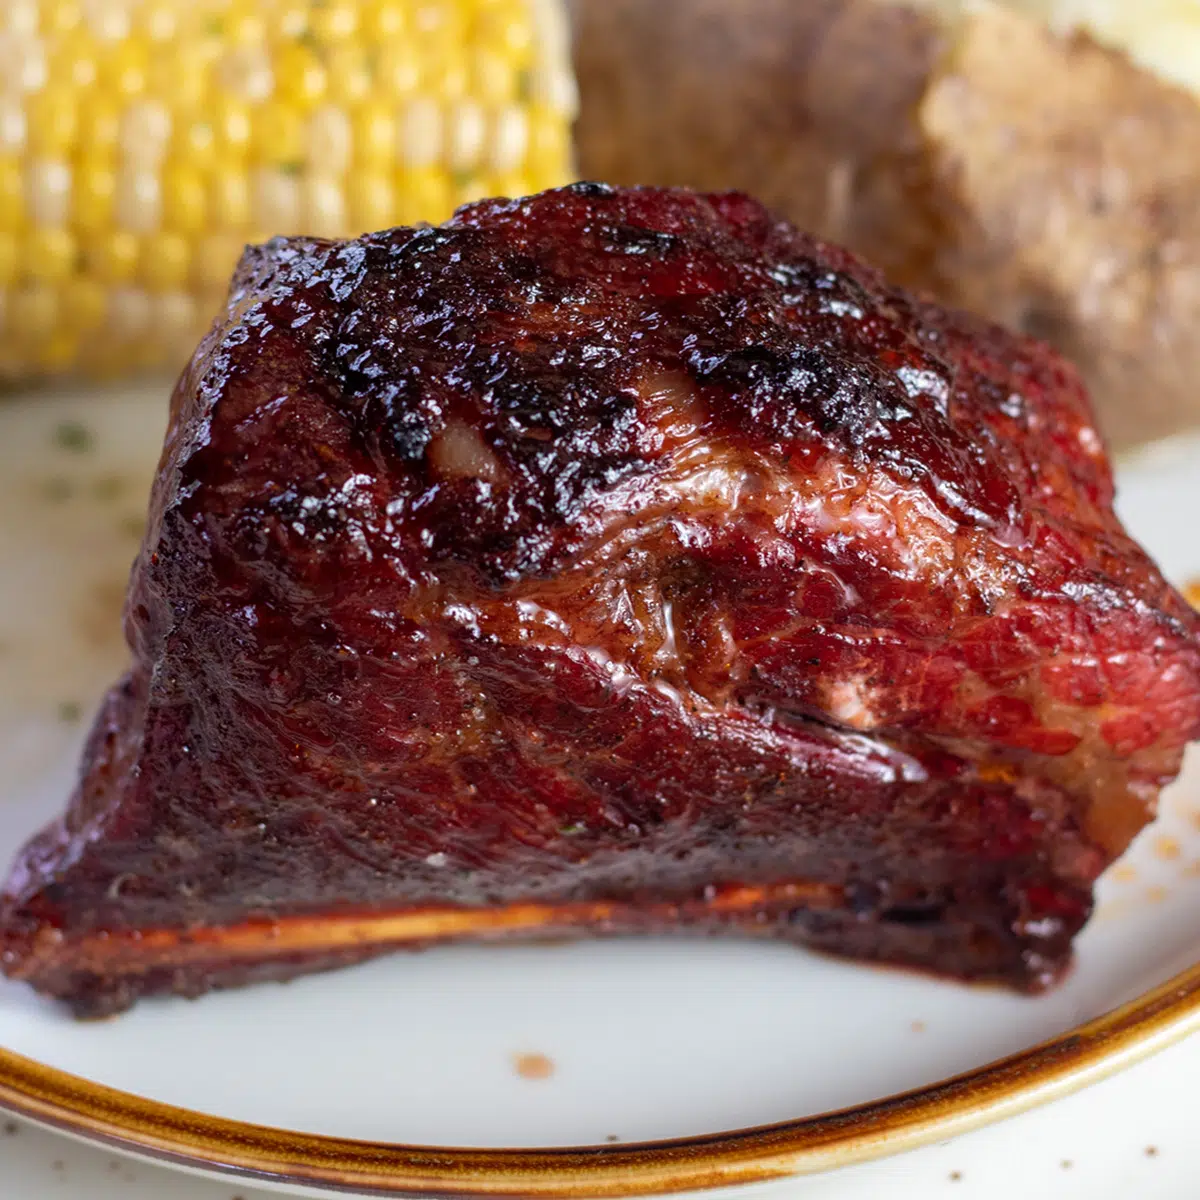 Smoked short ribs served on tan plate with potato and corn on the cob.